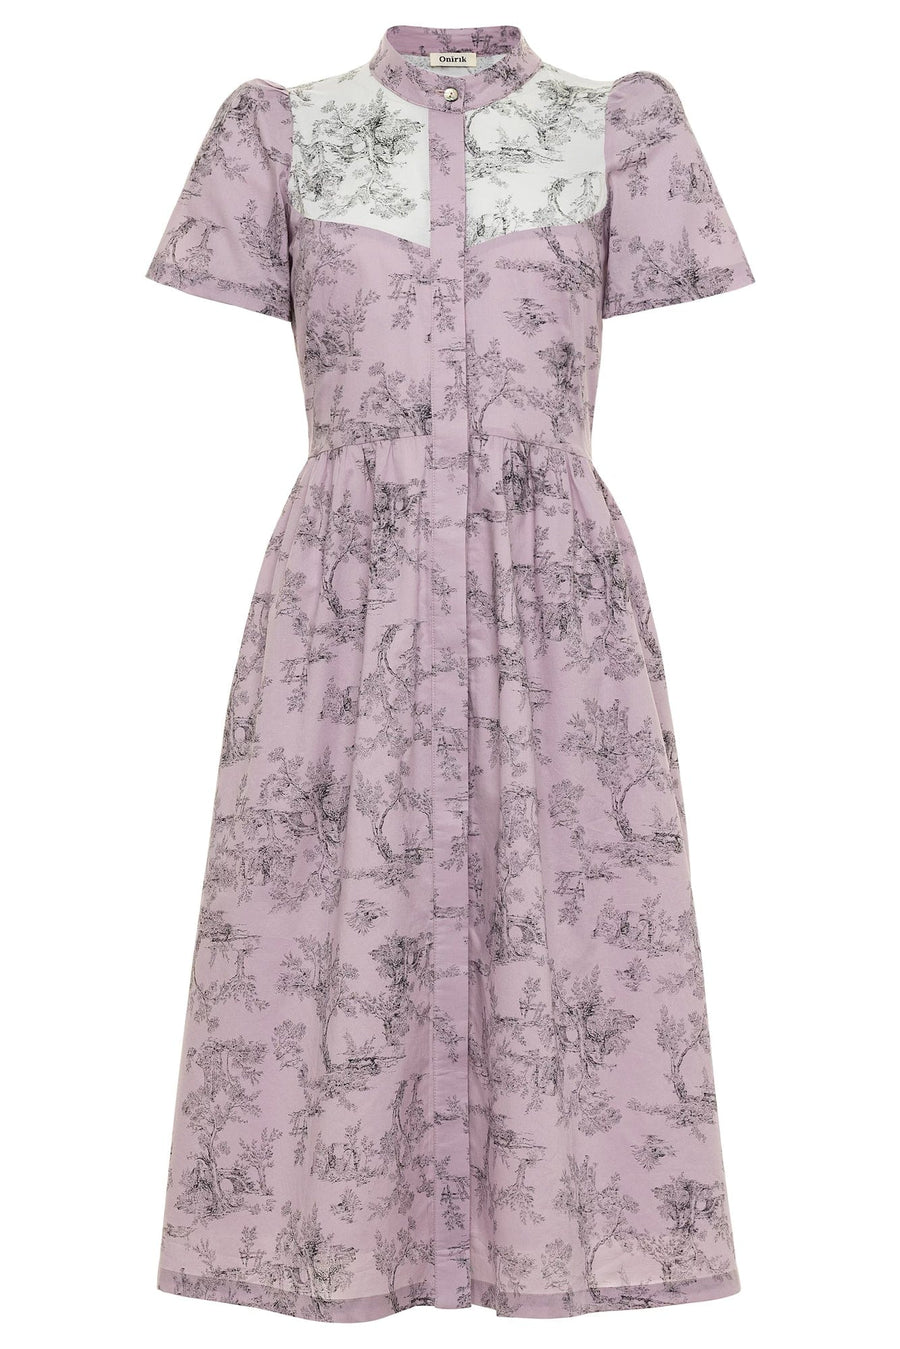 Clover Shirt Dress in Lilac + Vintage White Toile Print Cotton Voile